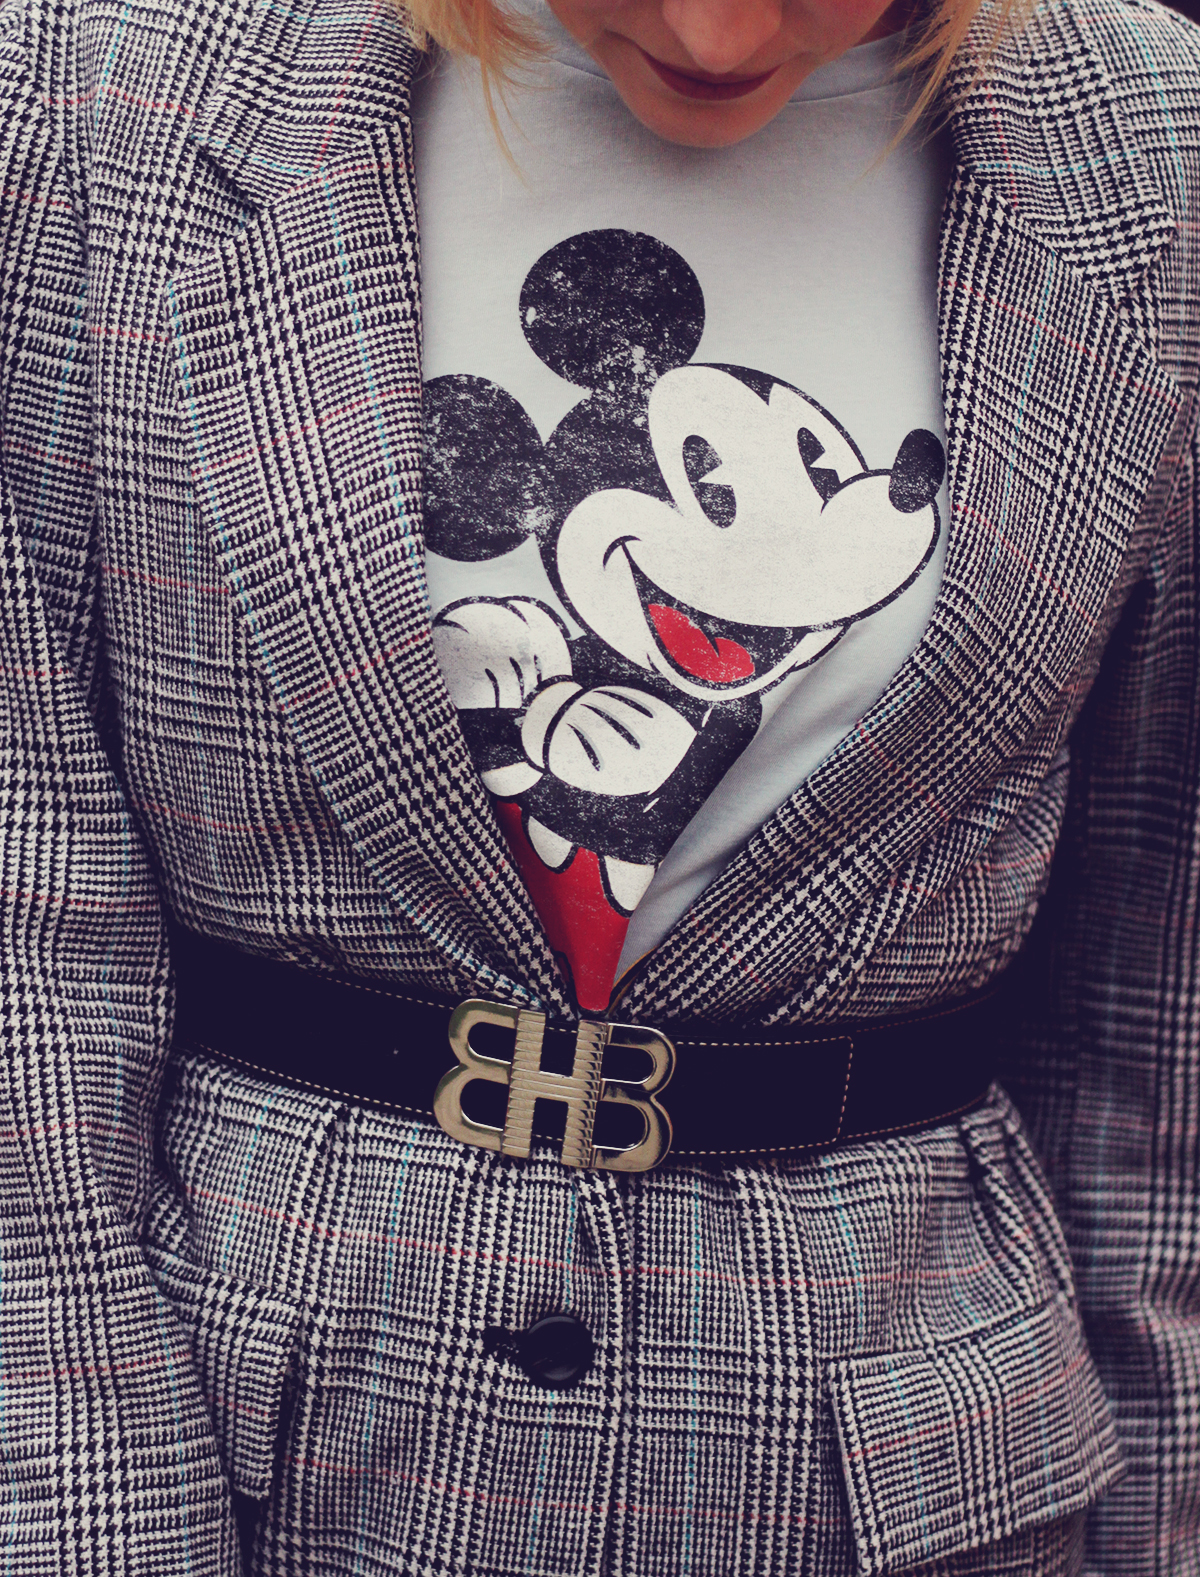 Mickey Mouse t-shirt, gingham coat, Hugo Boss belt, office look, work outfit inspiration